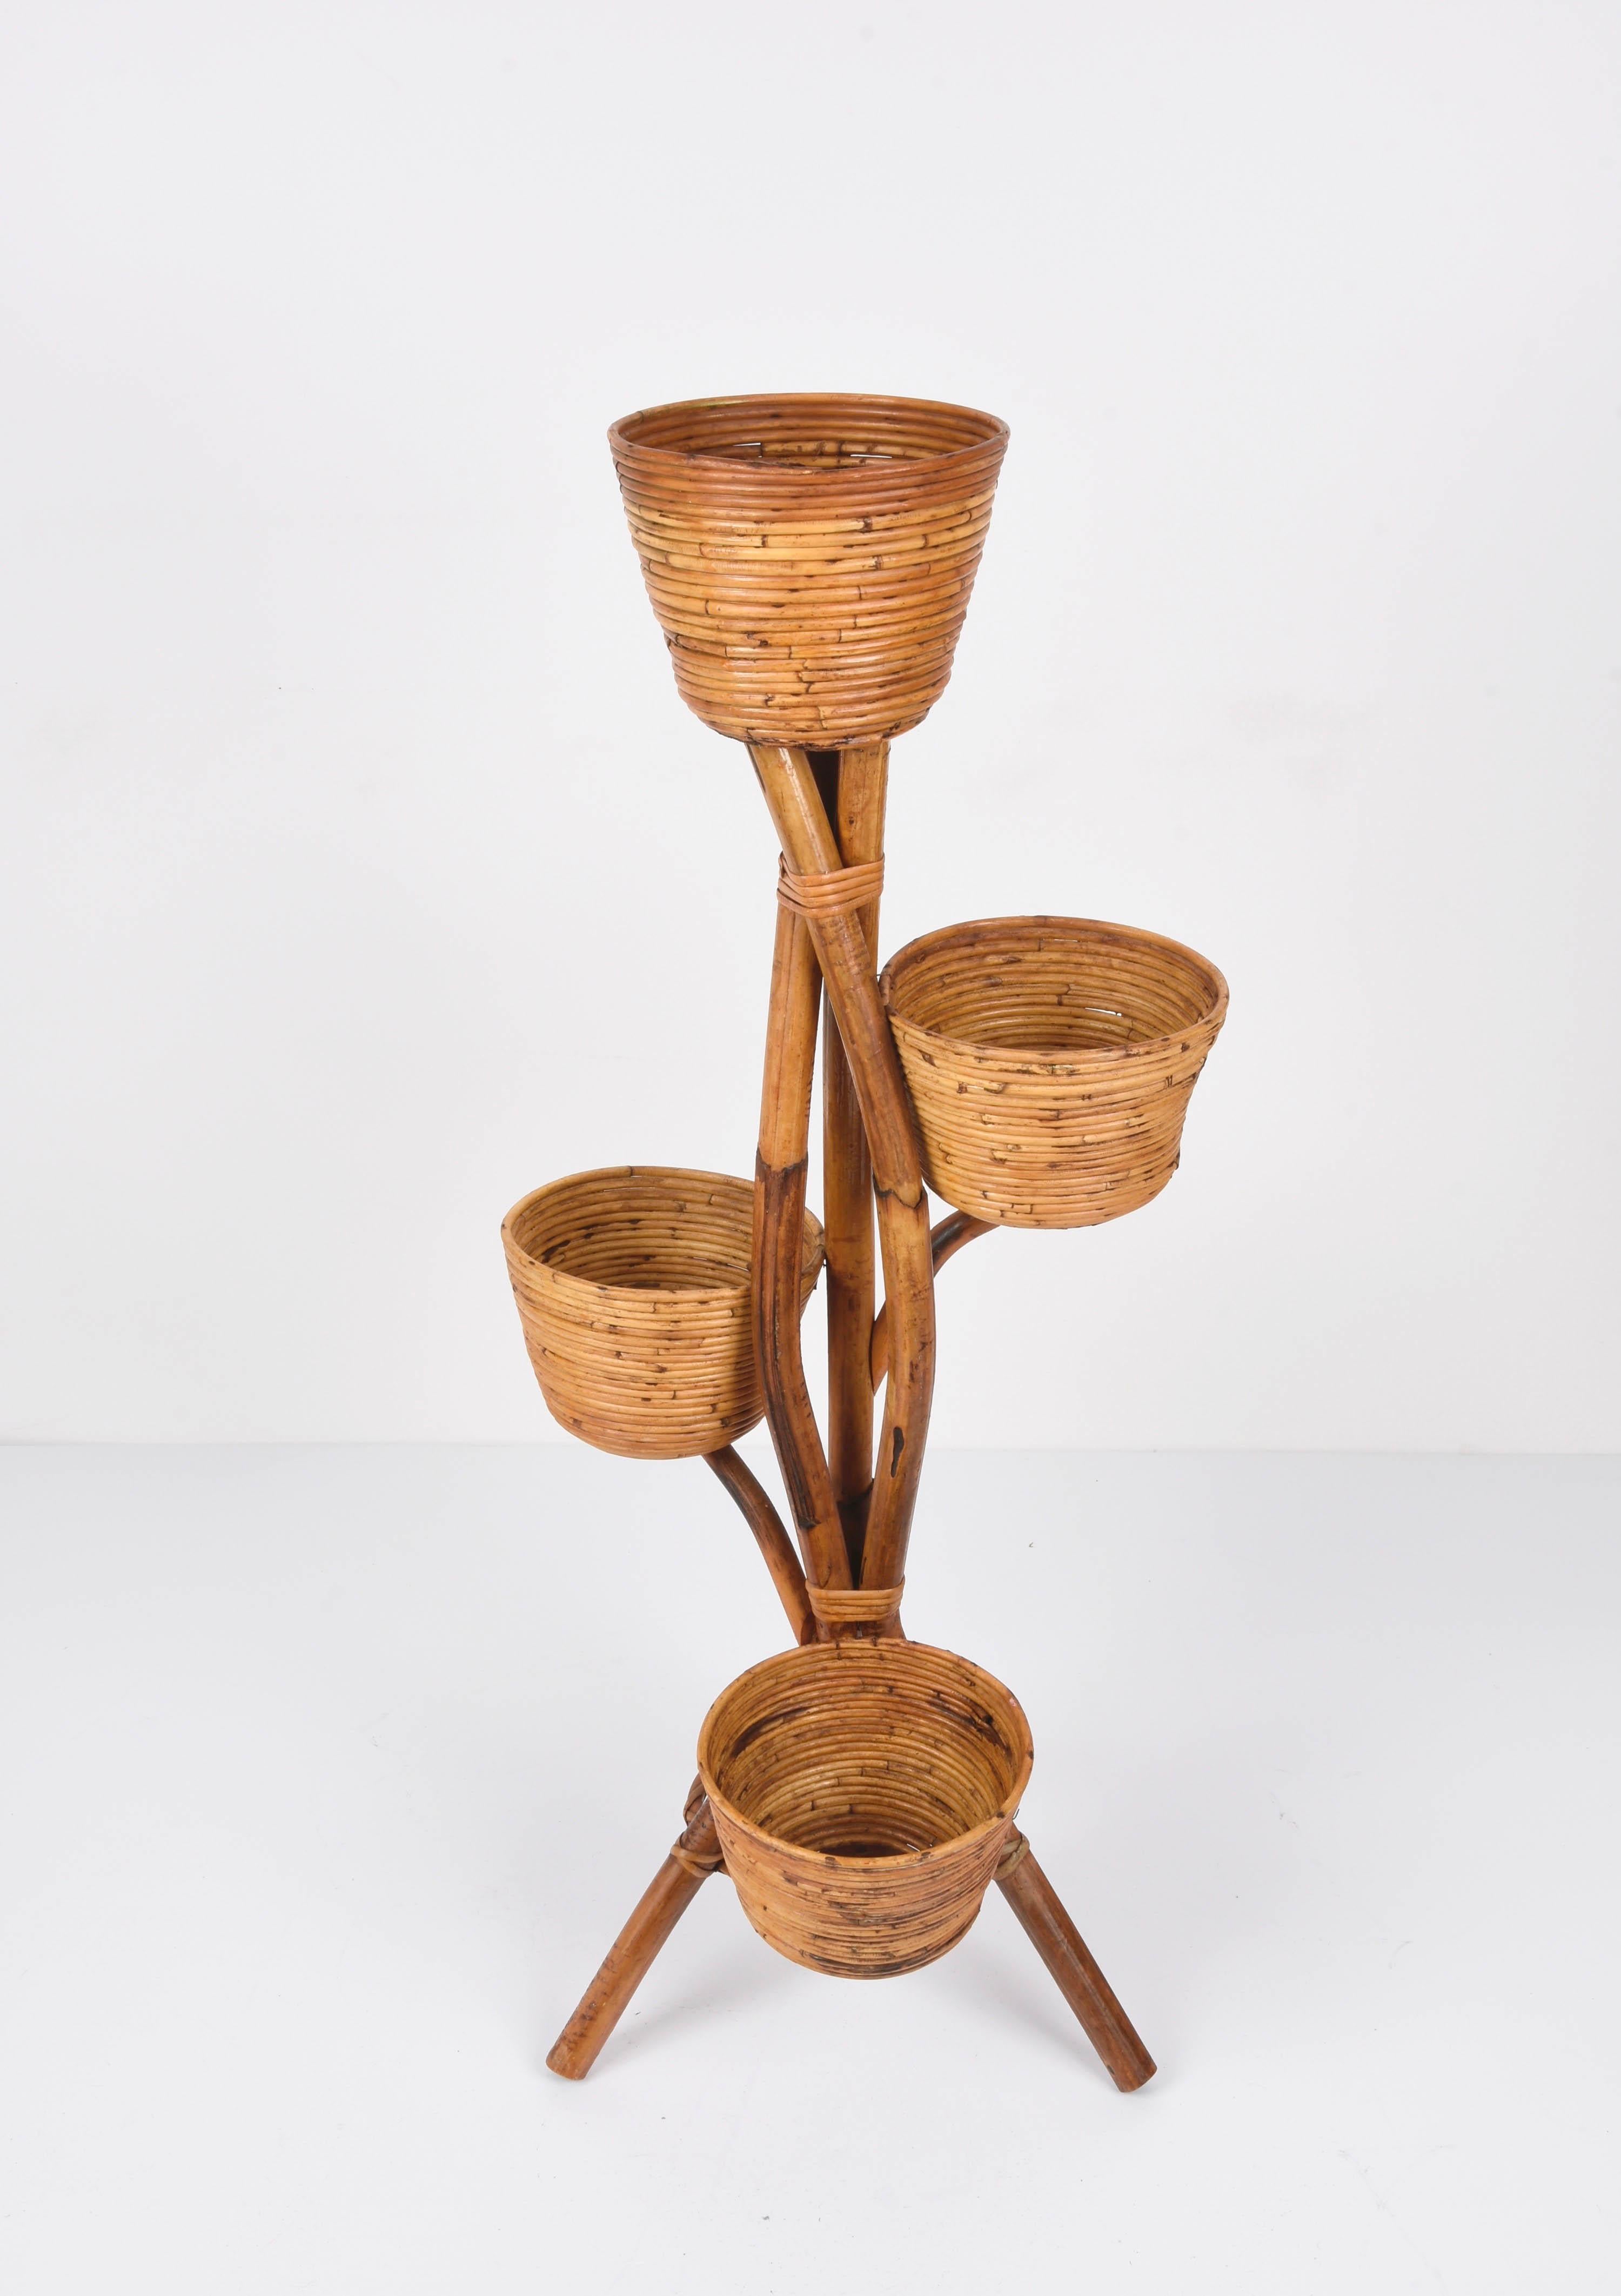 European Midcentury Bamboo and Wicker Italian Four-Levelled Planter, 1950s